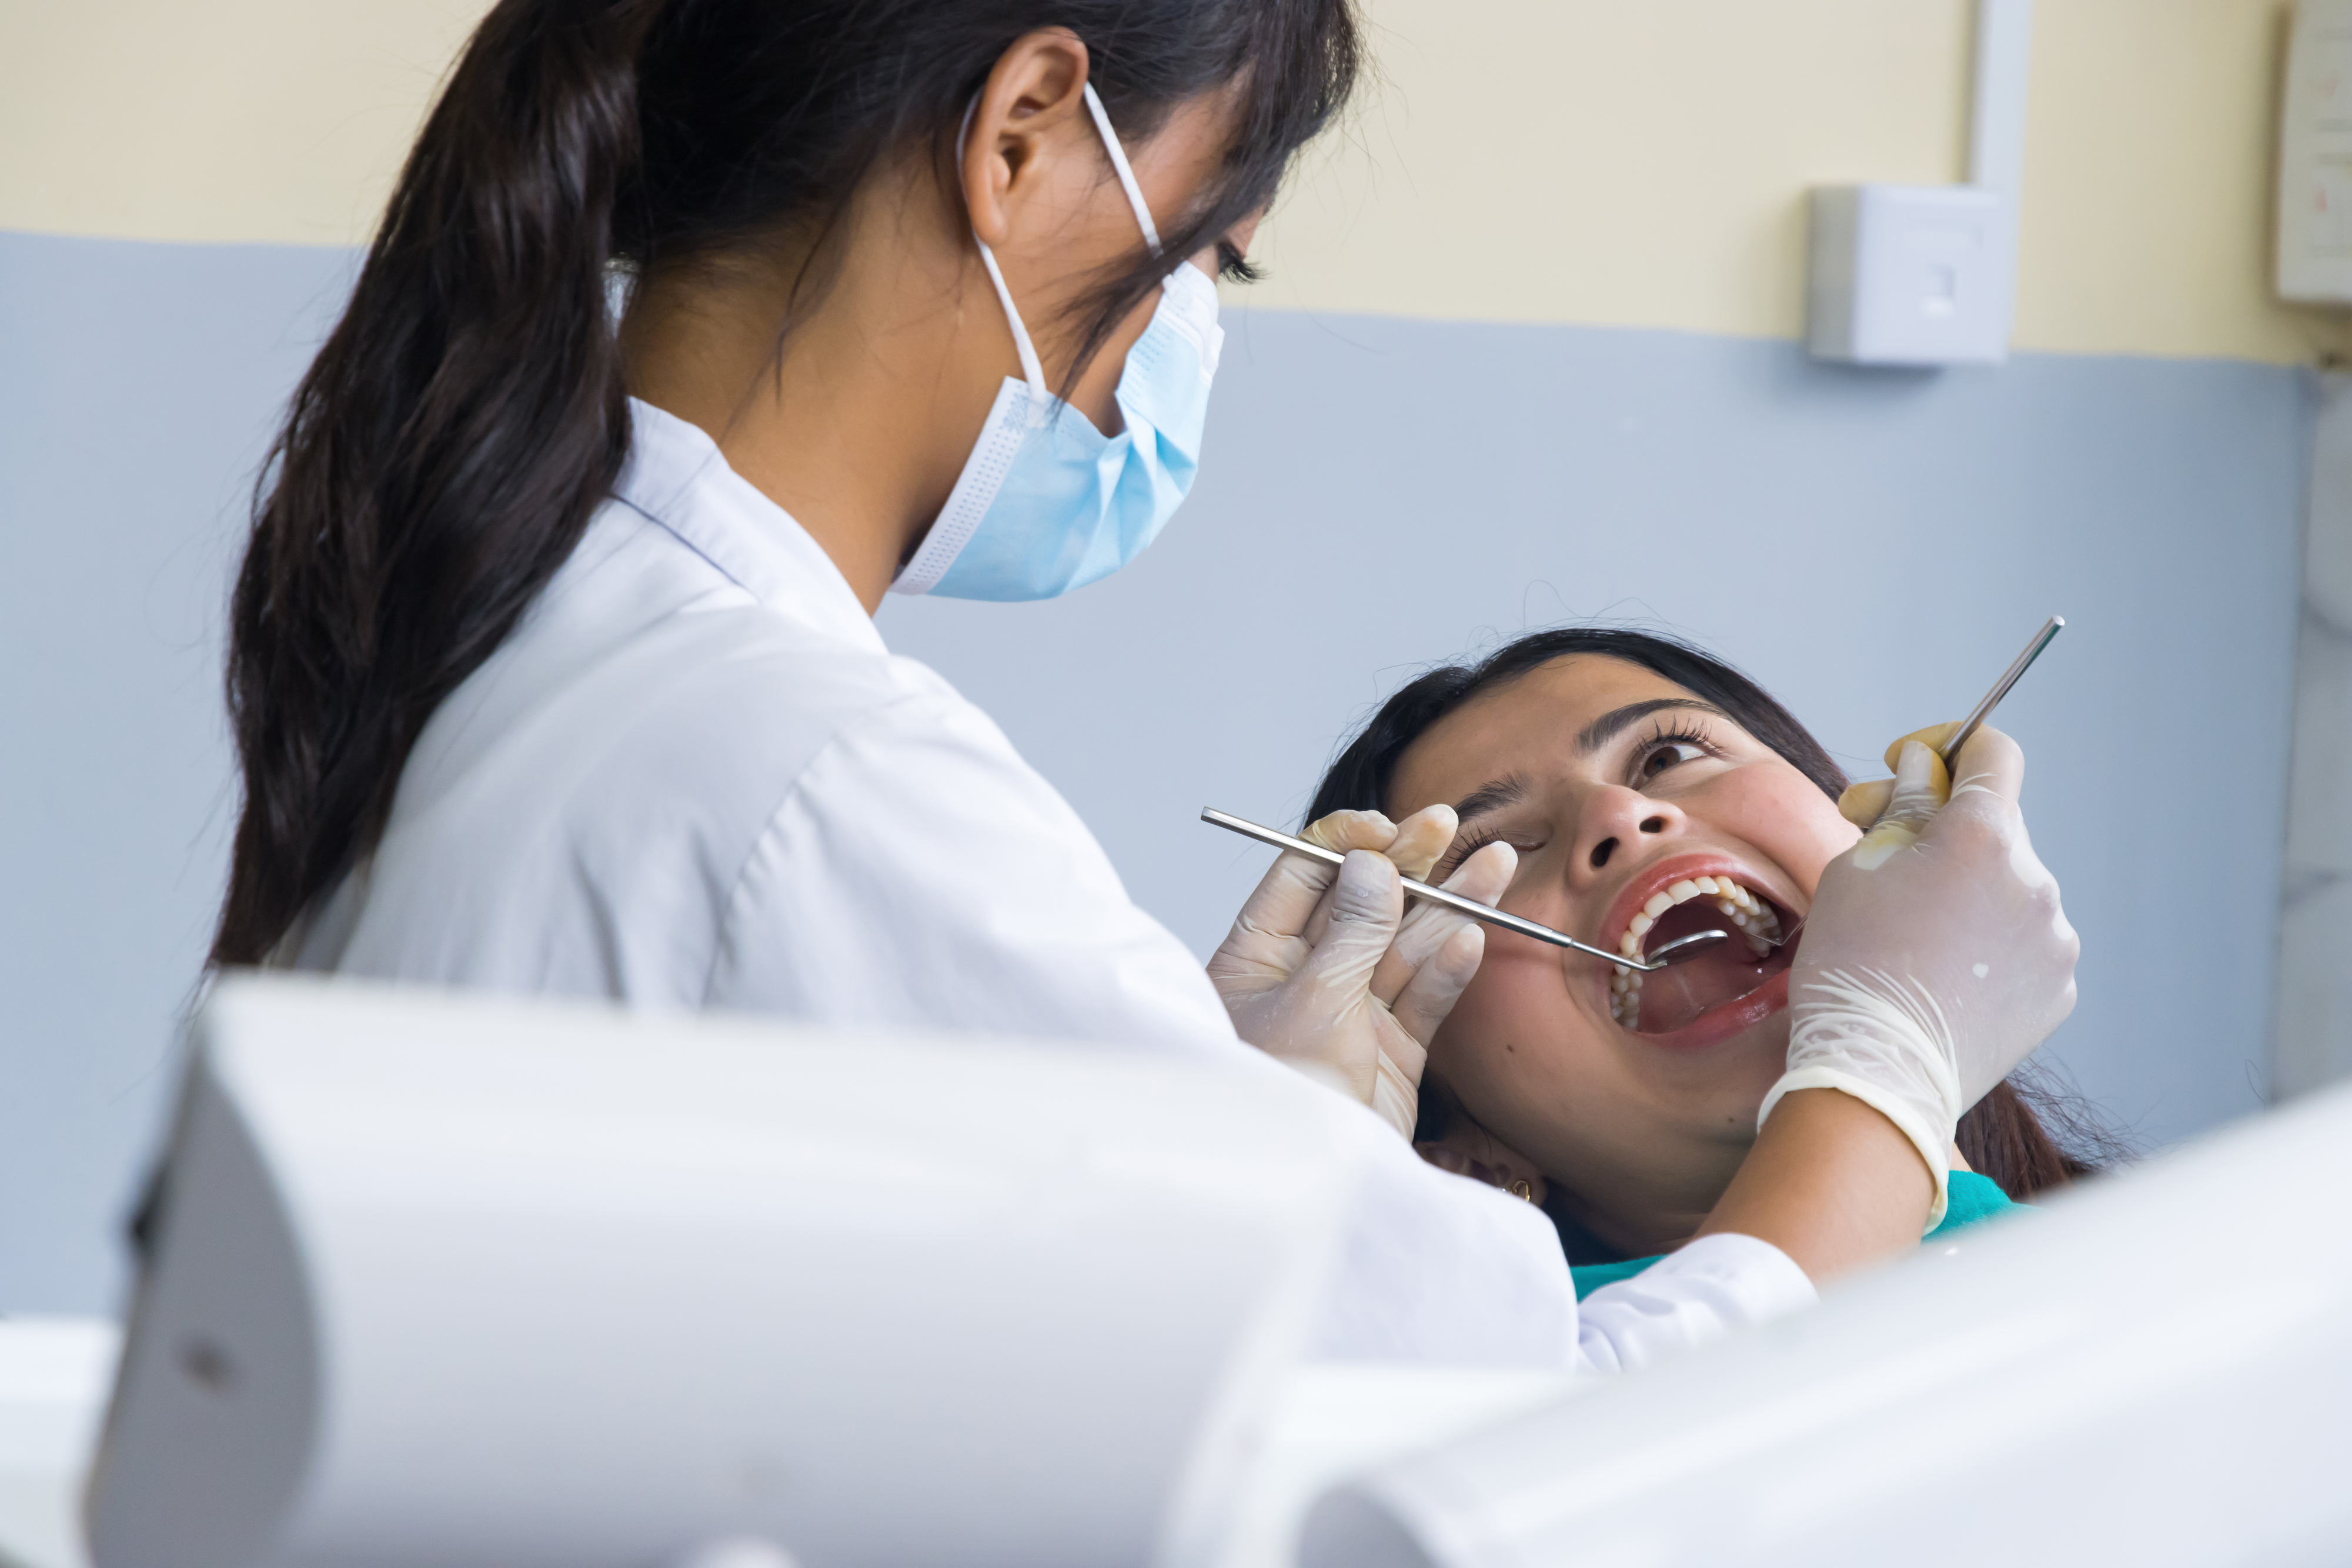 A dentist performing an exam on a patient